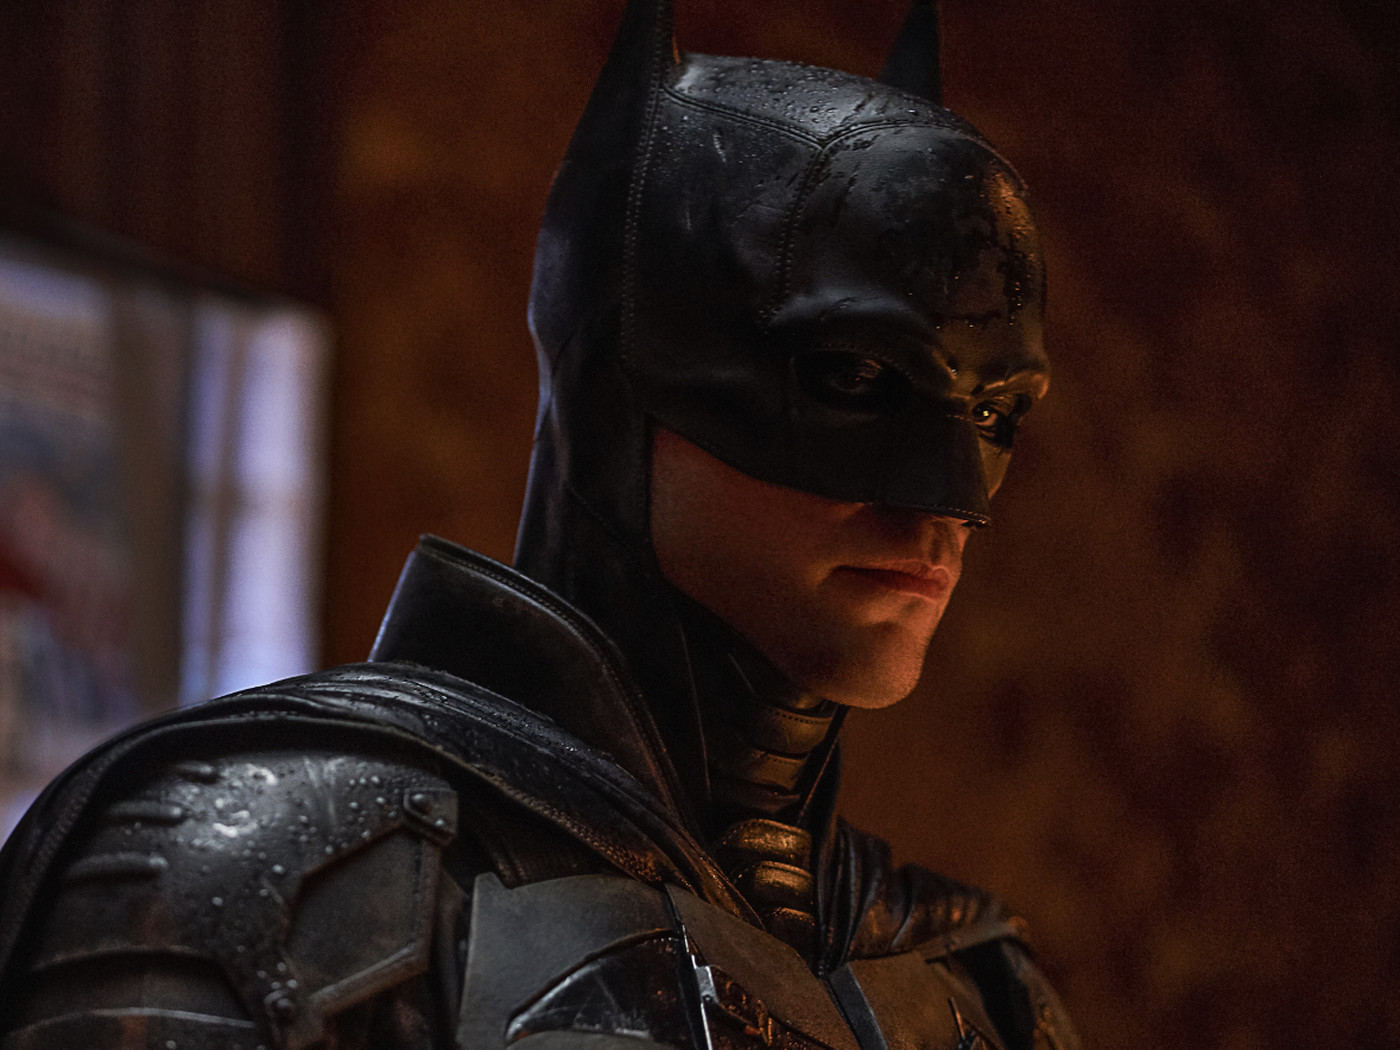 Do you want to watch 'The Batman' online for free? Swing into action and stream Robert Pattinson's new flick now.